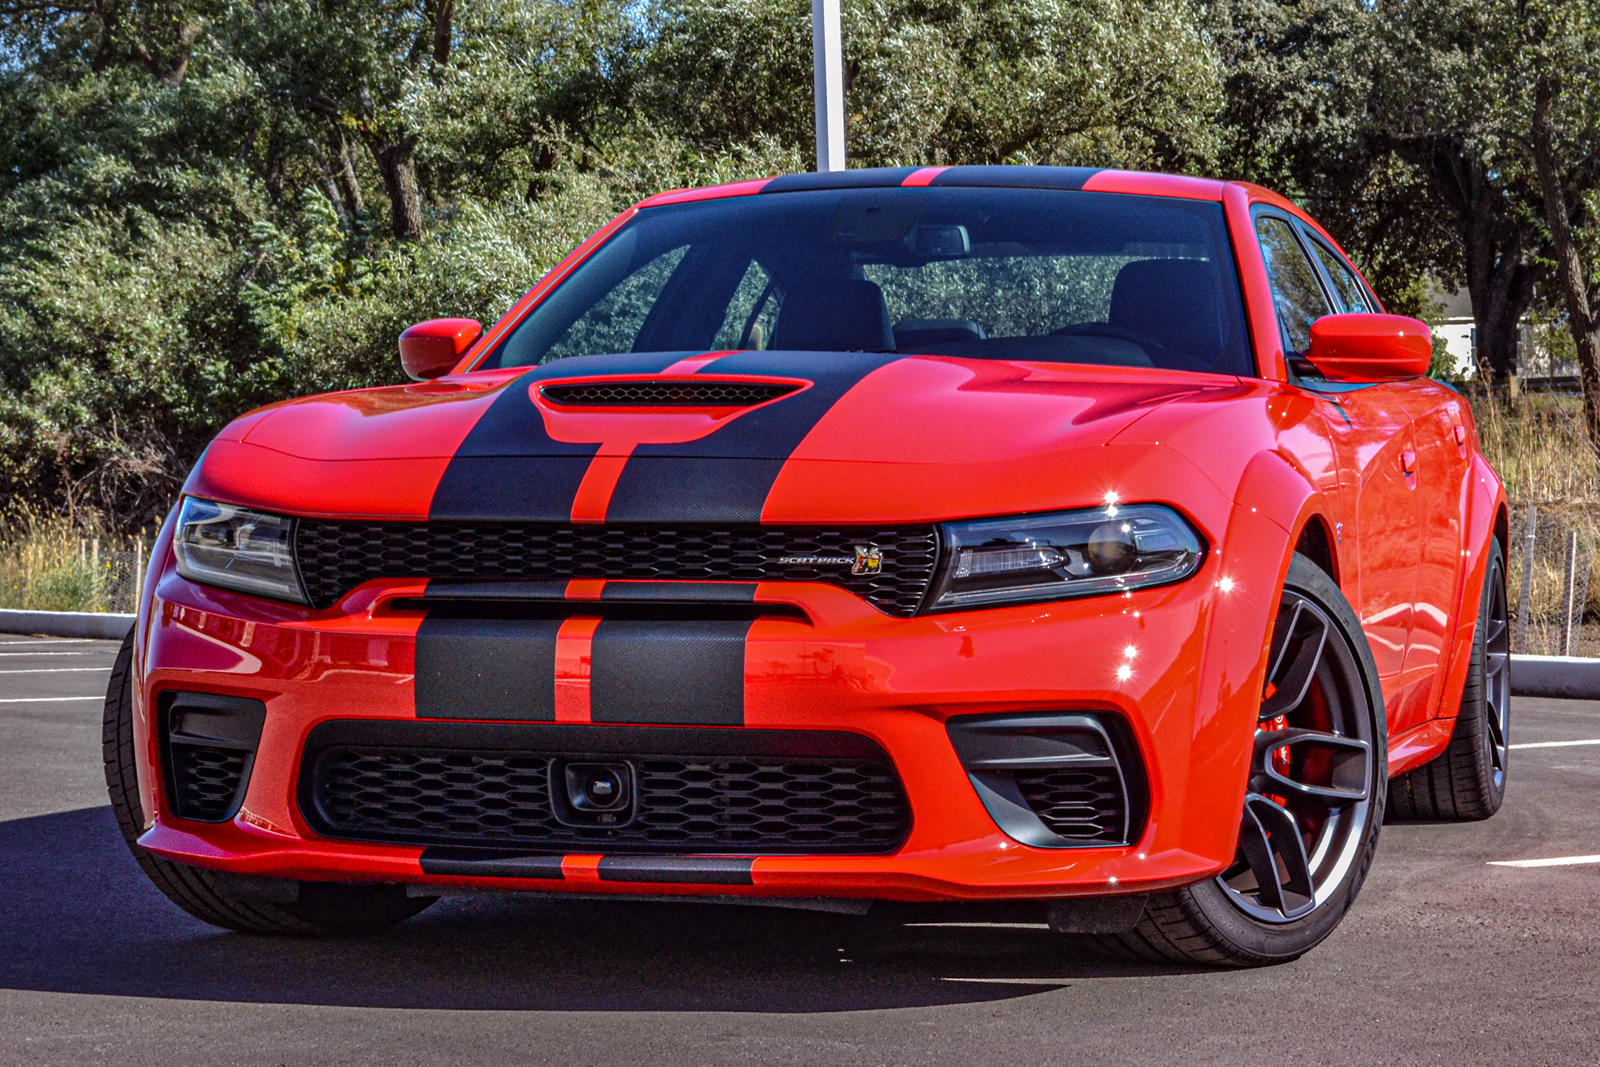 2020 Dodge Charger SRT Hellcat Widebody First Drive Review: All Hail The Ki...